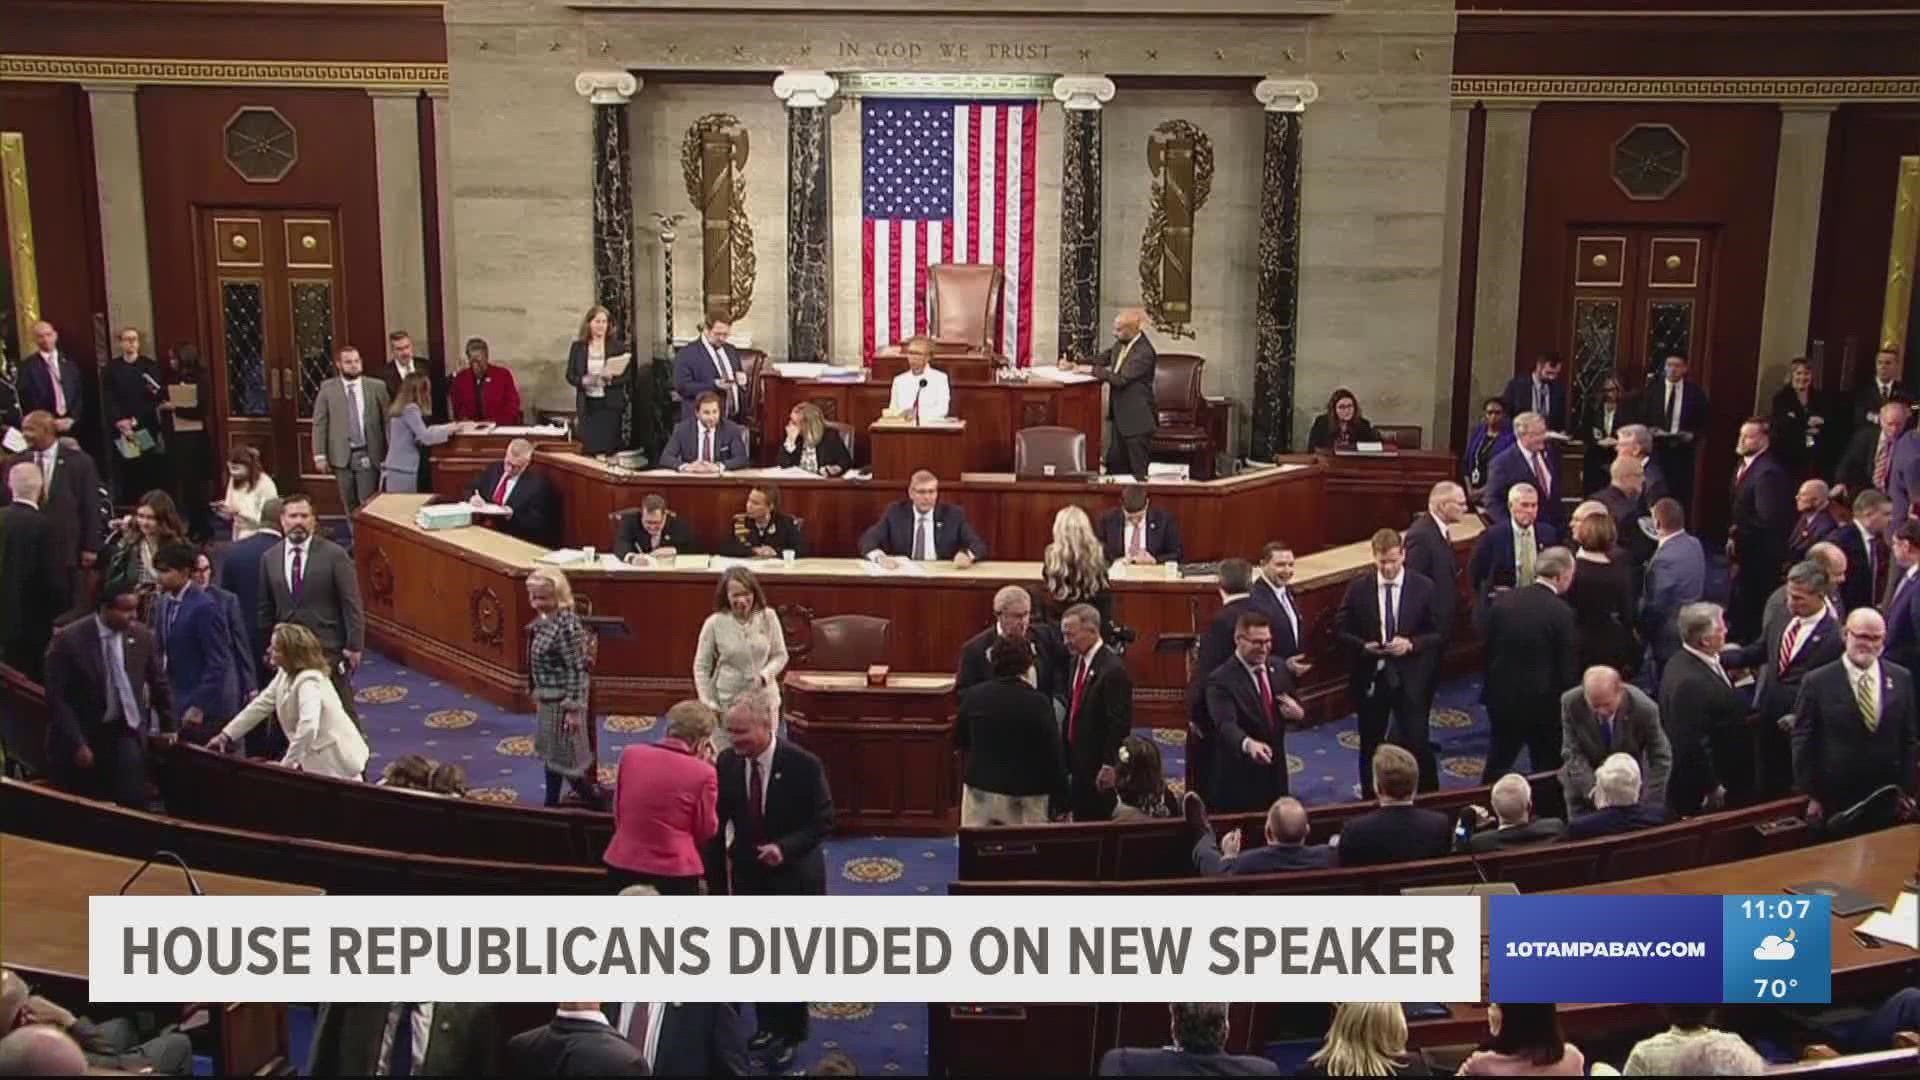 Without a speaker, the House cannot fully form to swear in its members, name committee chairmen or engage in floor proceedings.